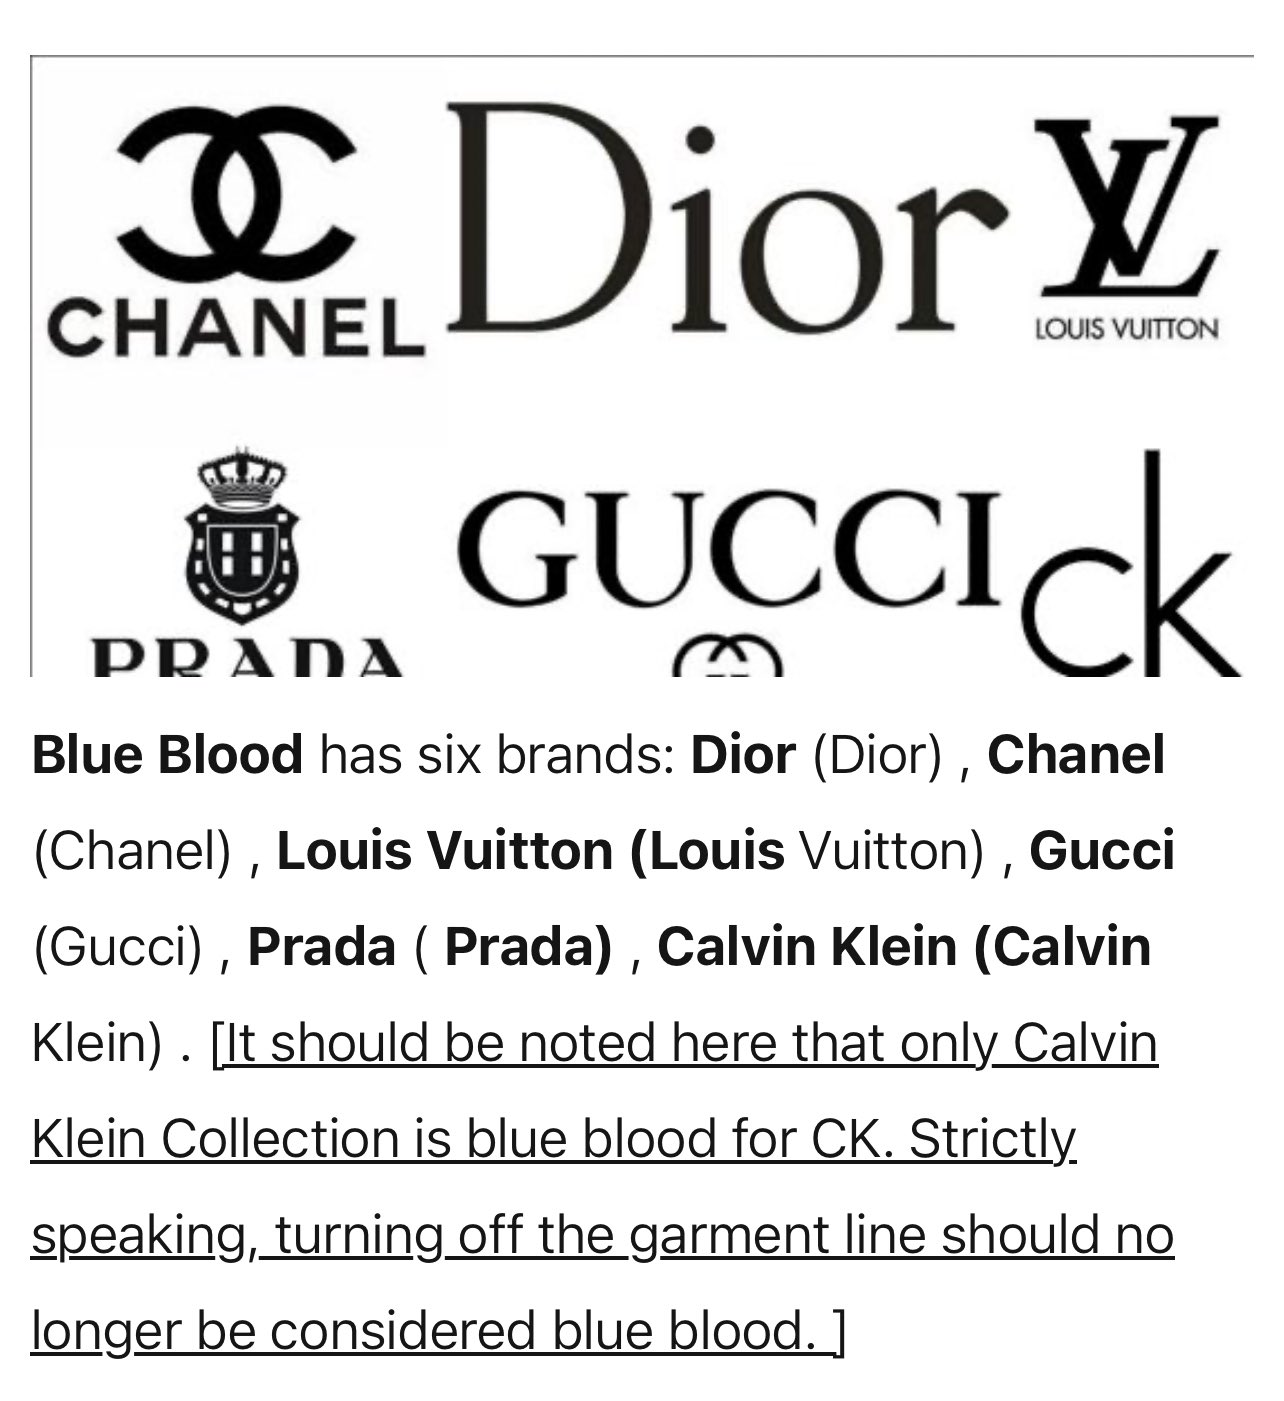 Dior vs. Chanel: Which Luxury Brand is Better?